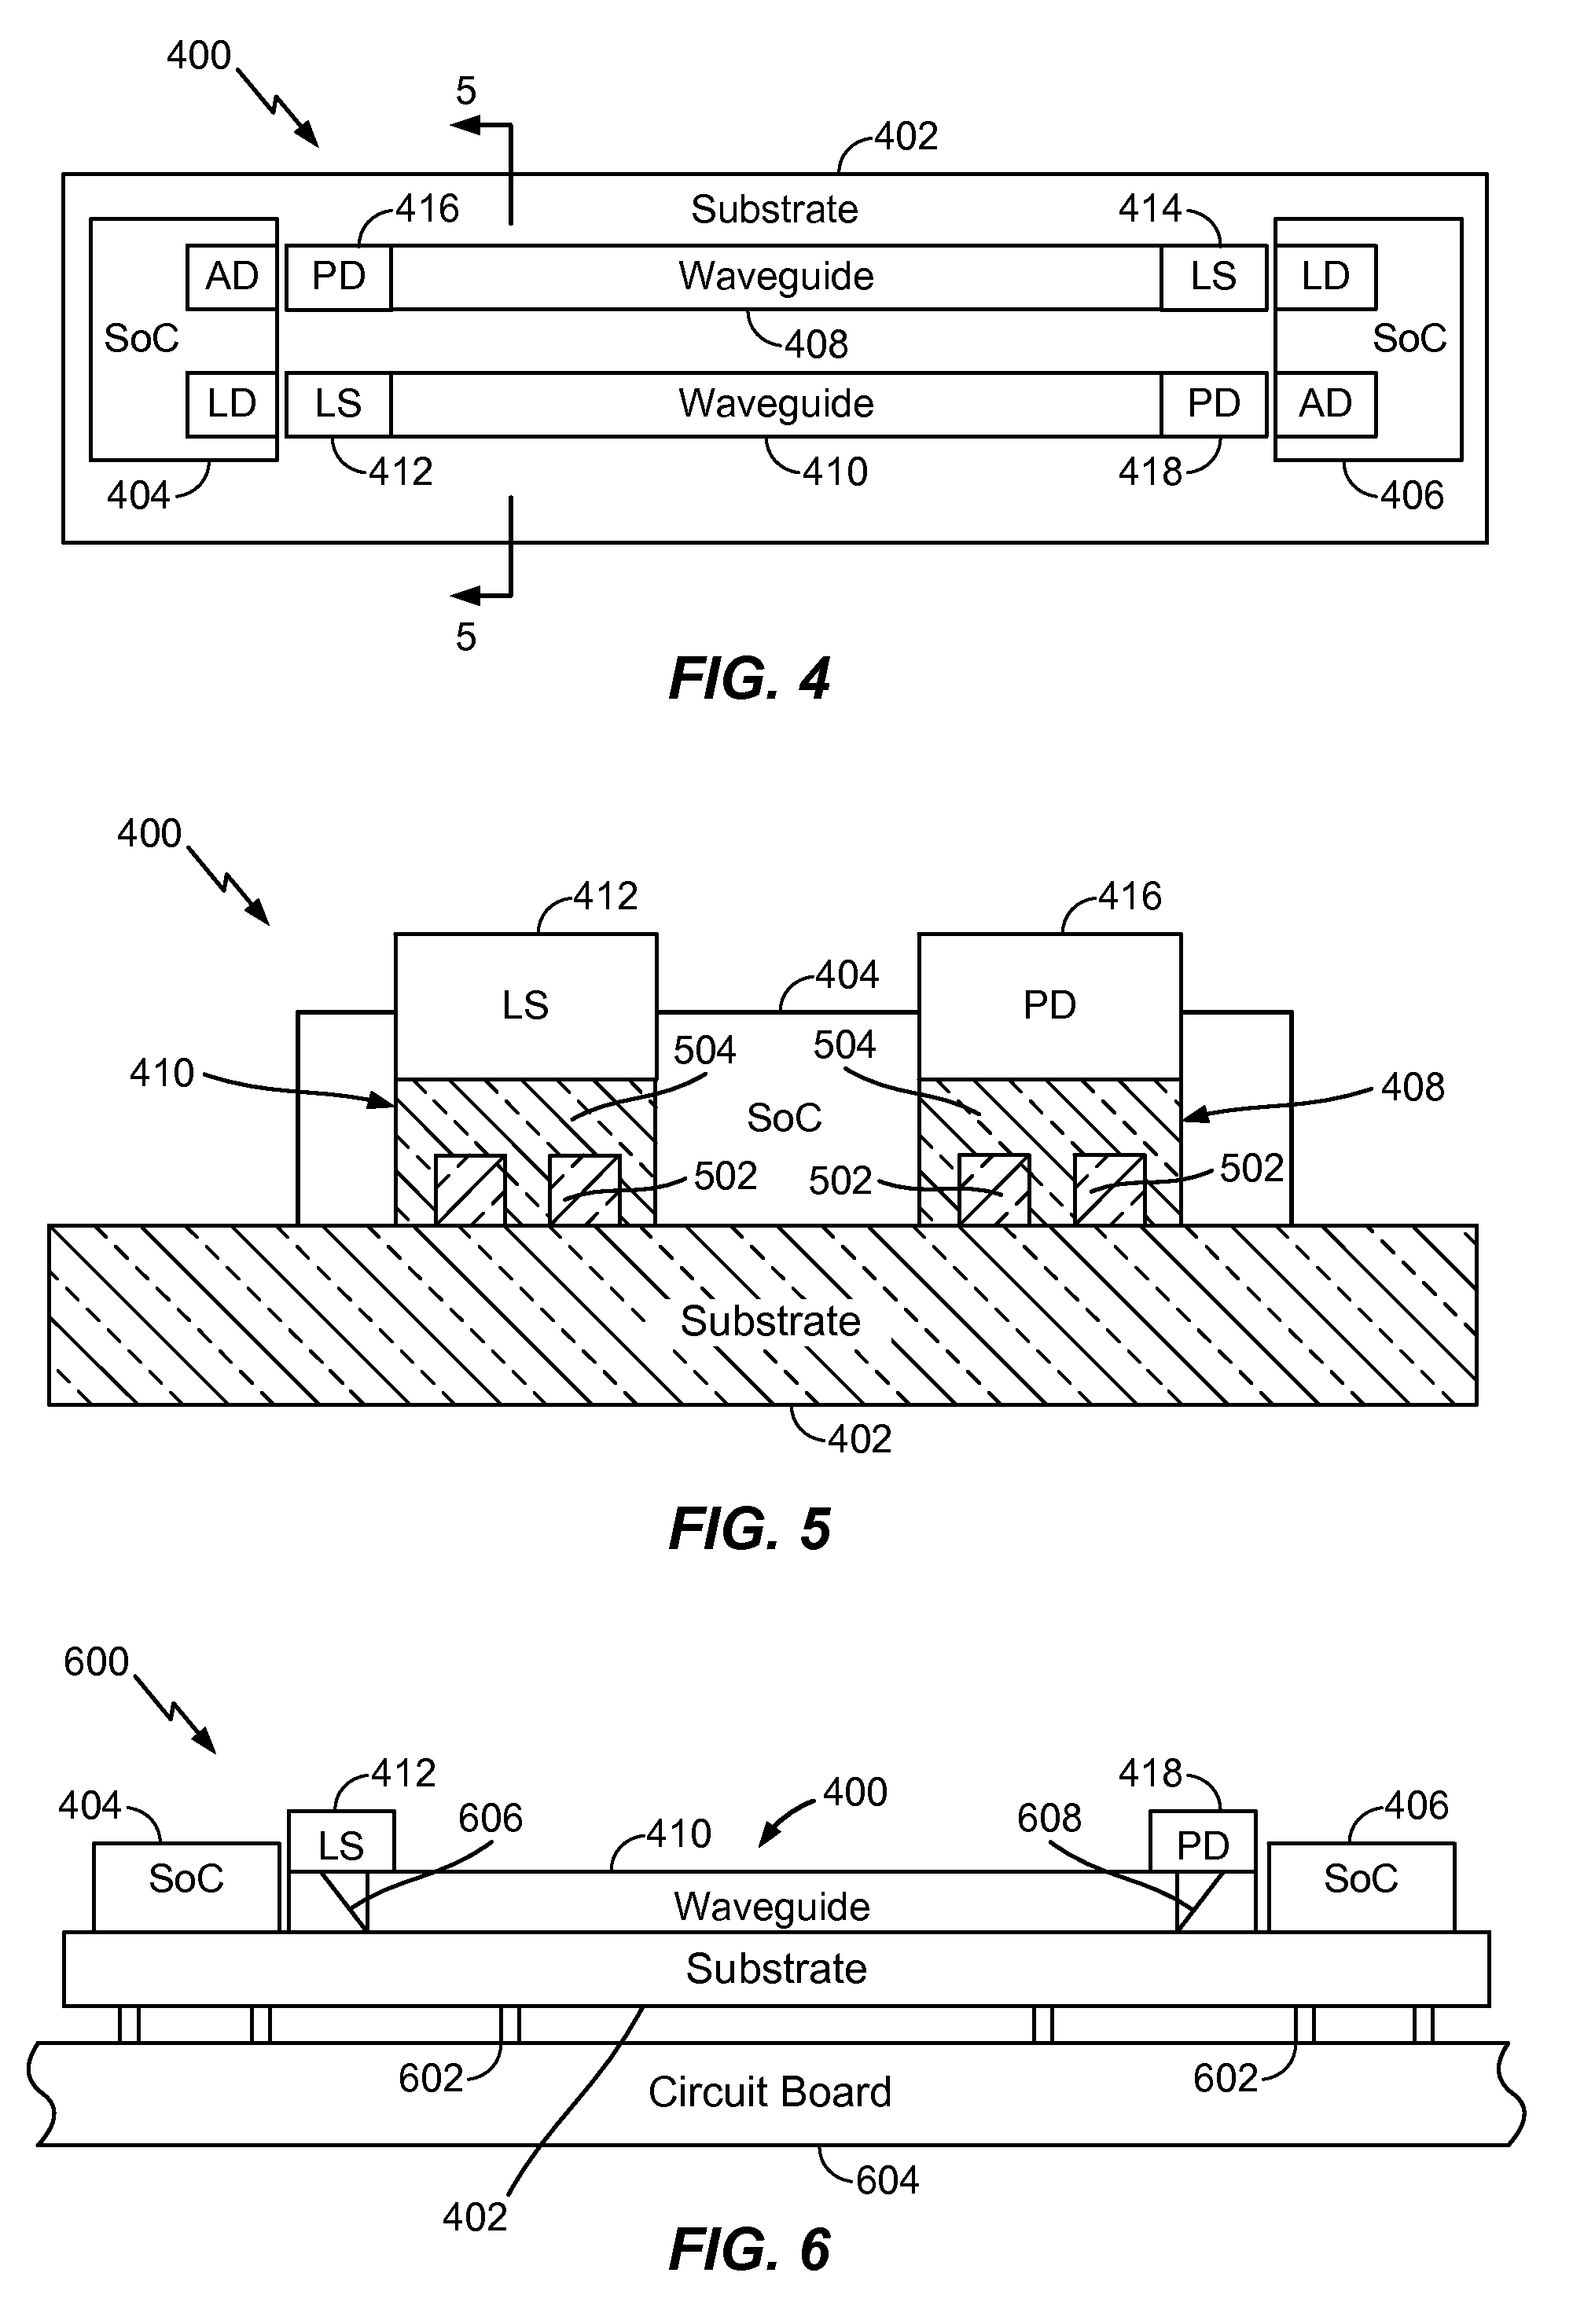 Electro-optical transceiver device to enable chip-to-chip interconnection